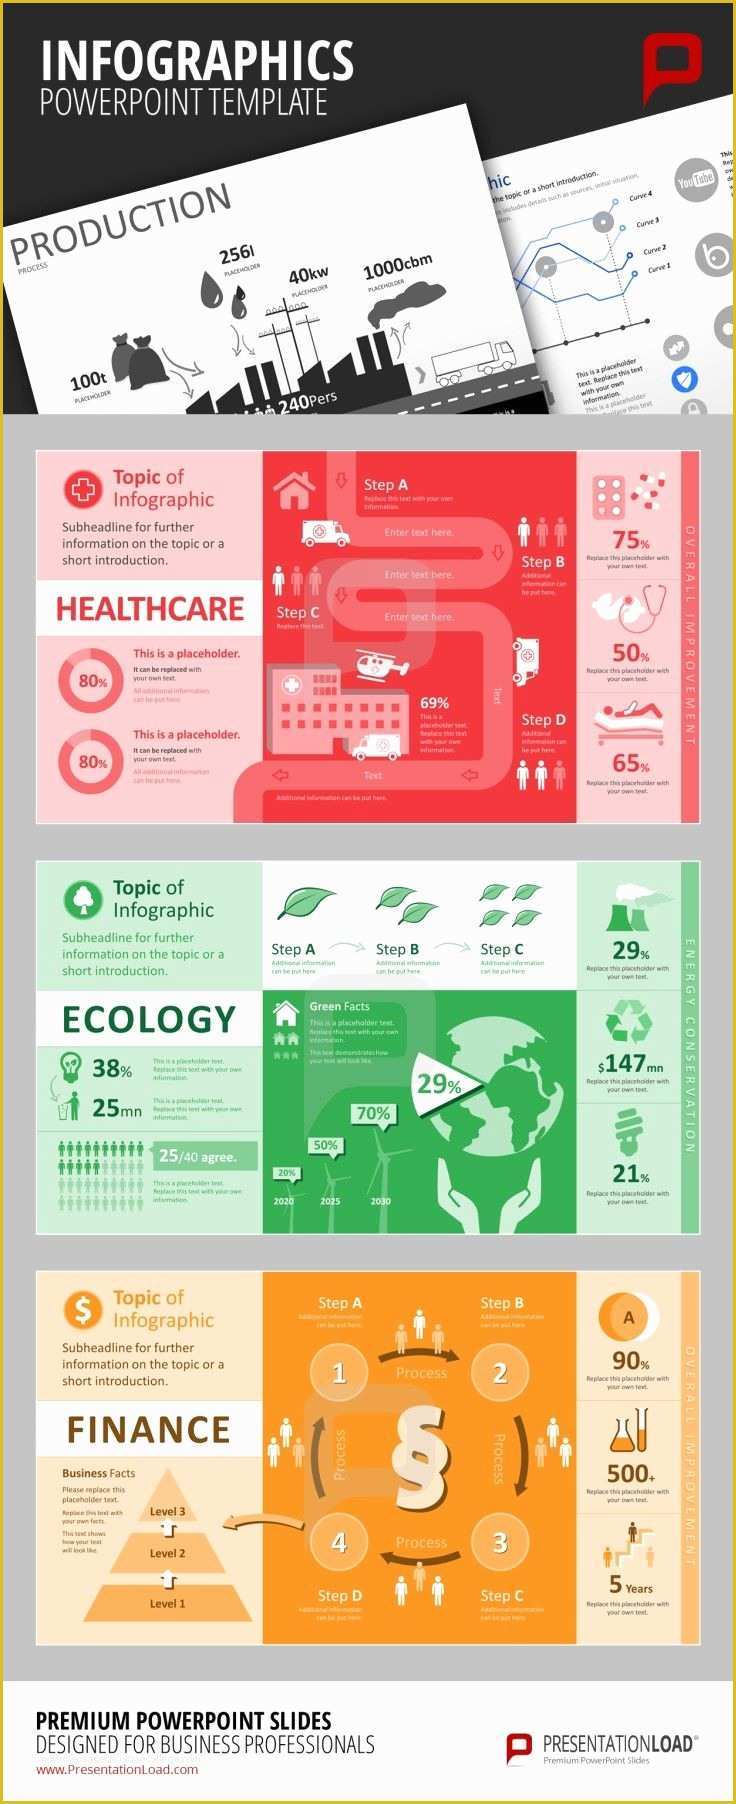 Microsoft Powerpoint Infographic Templates Free Of 92 Best Images About Infographics Powerpoint Templates